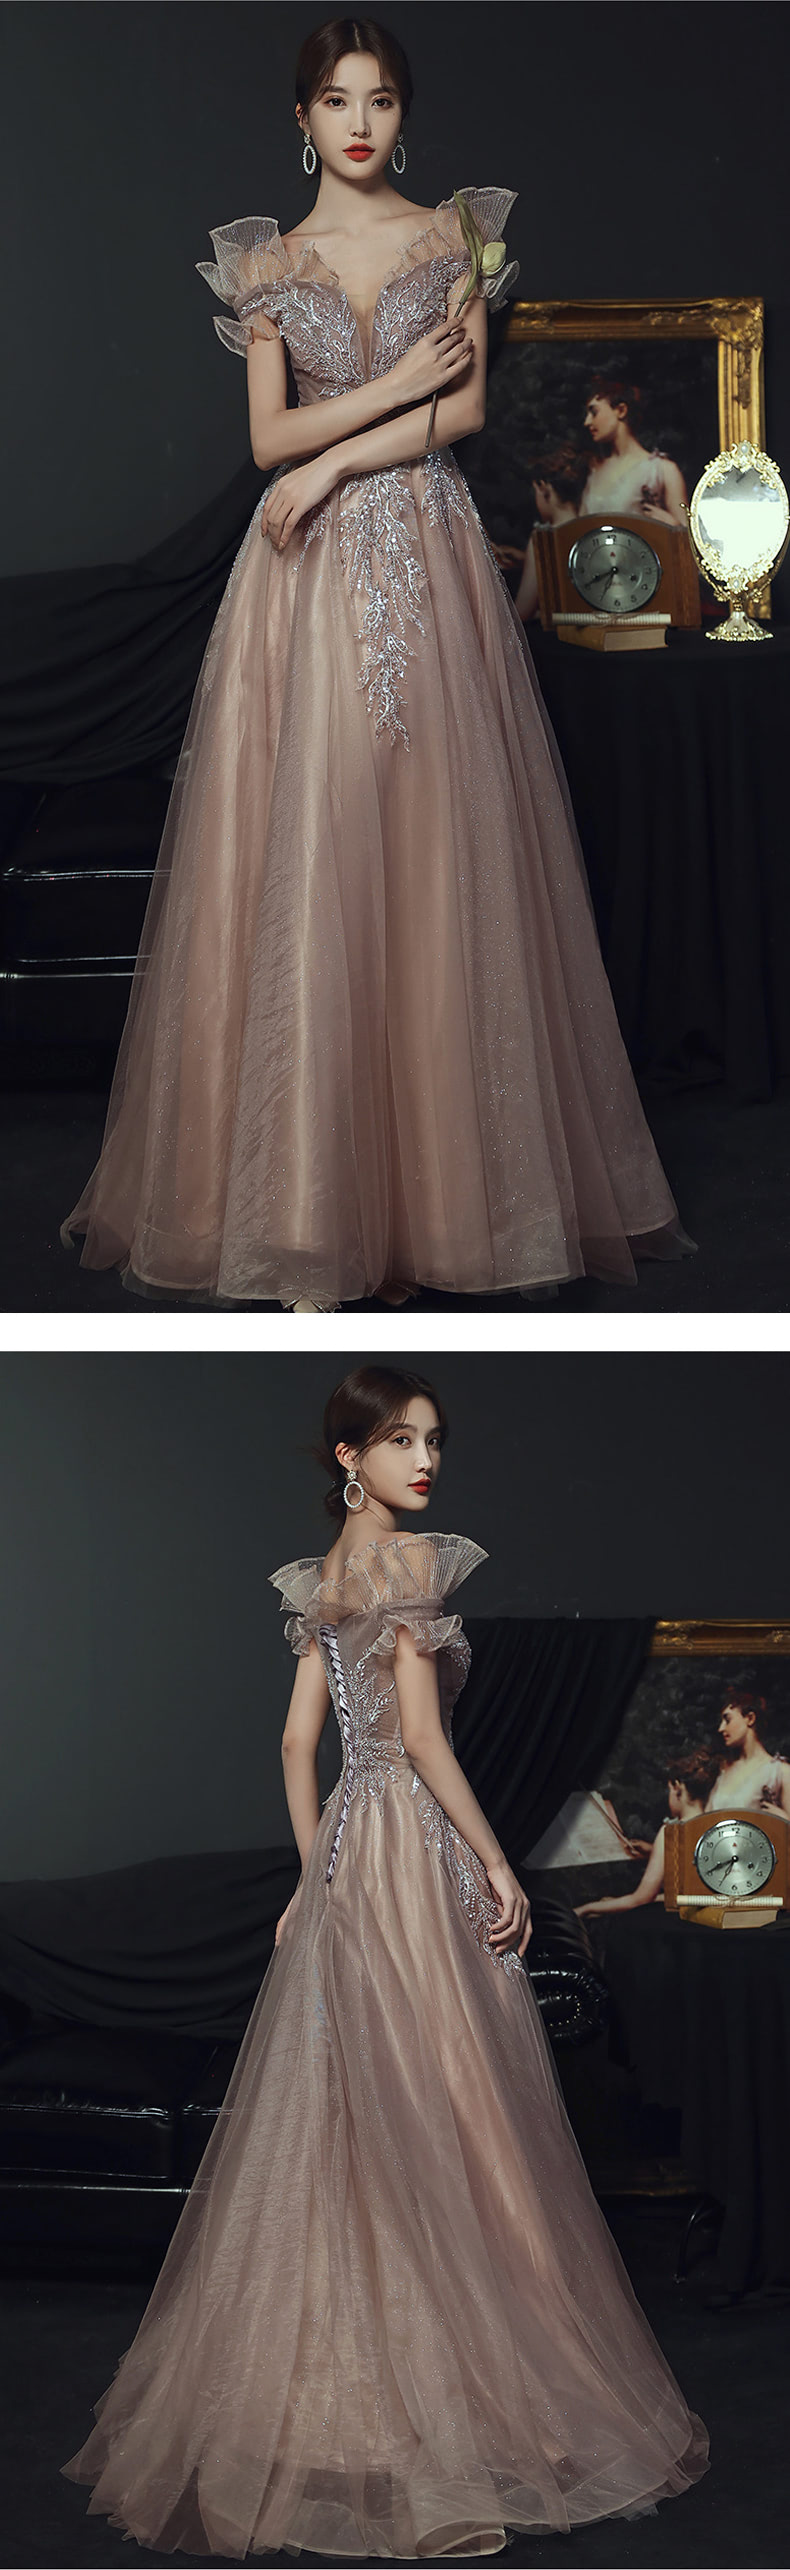 Vintage-Luxury-Ball-Gown-Party-Long-Dress-Prom-Formal-Outfit11.jpg